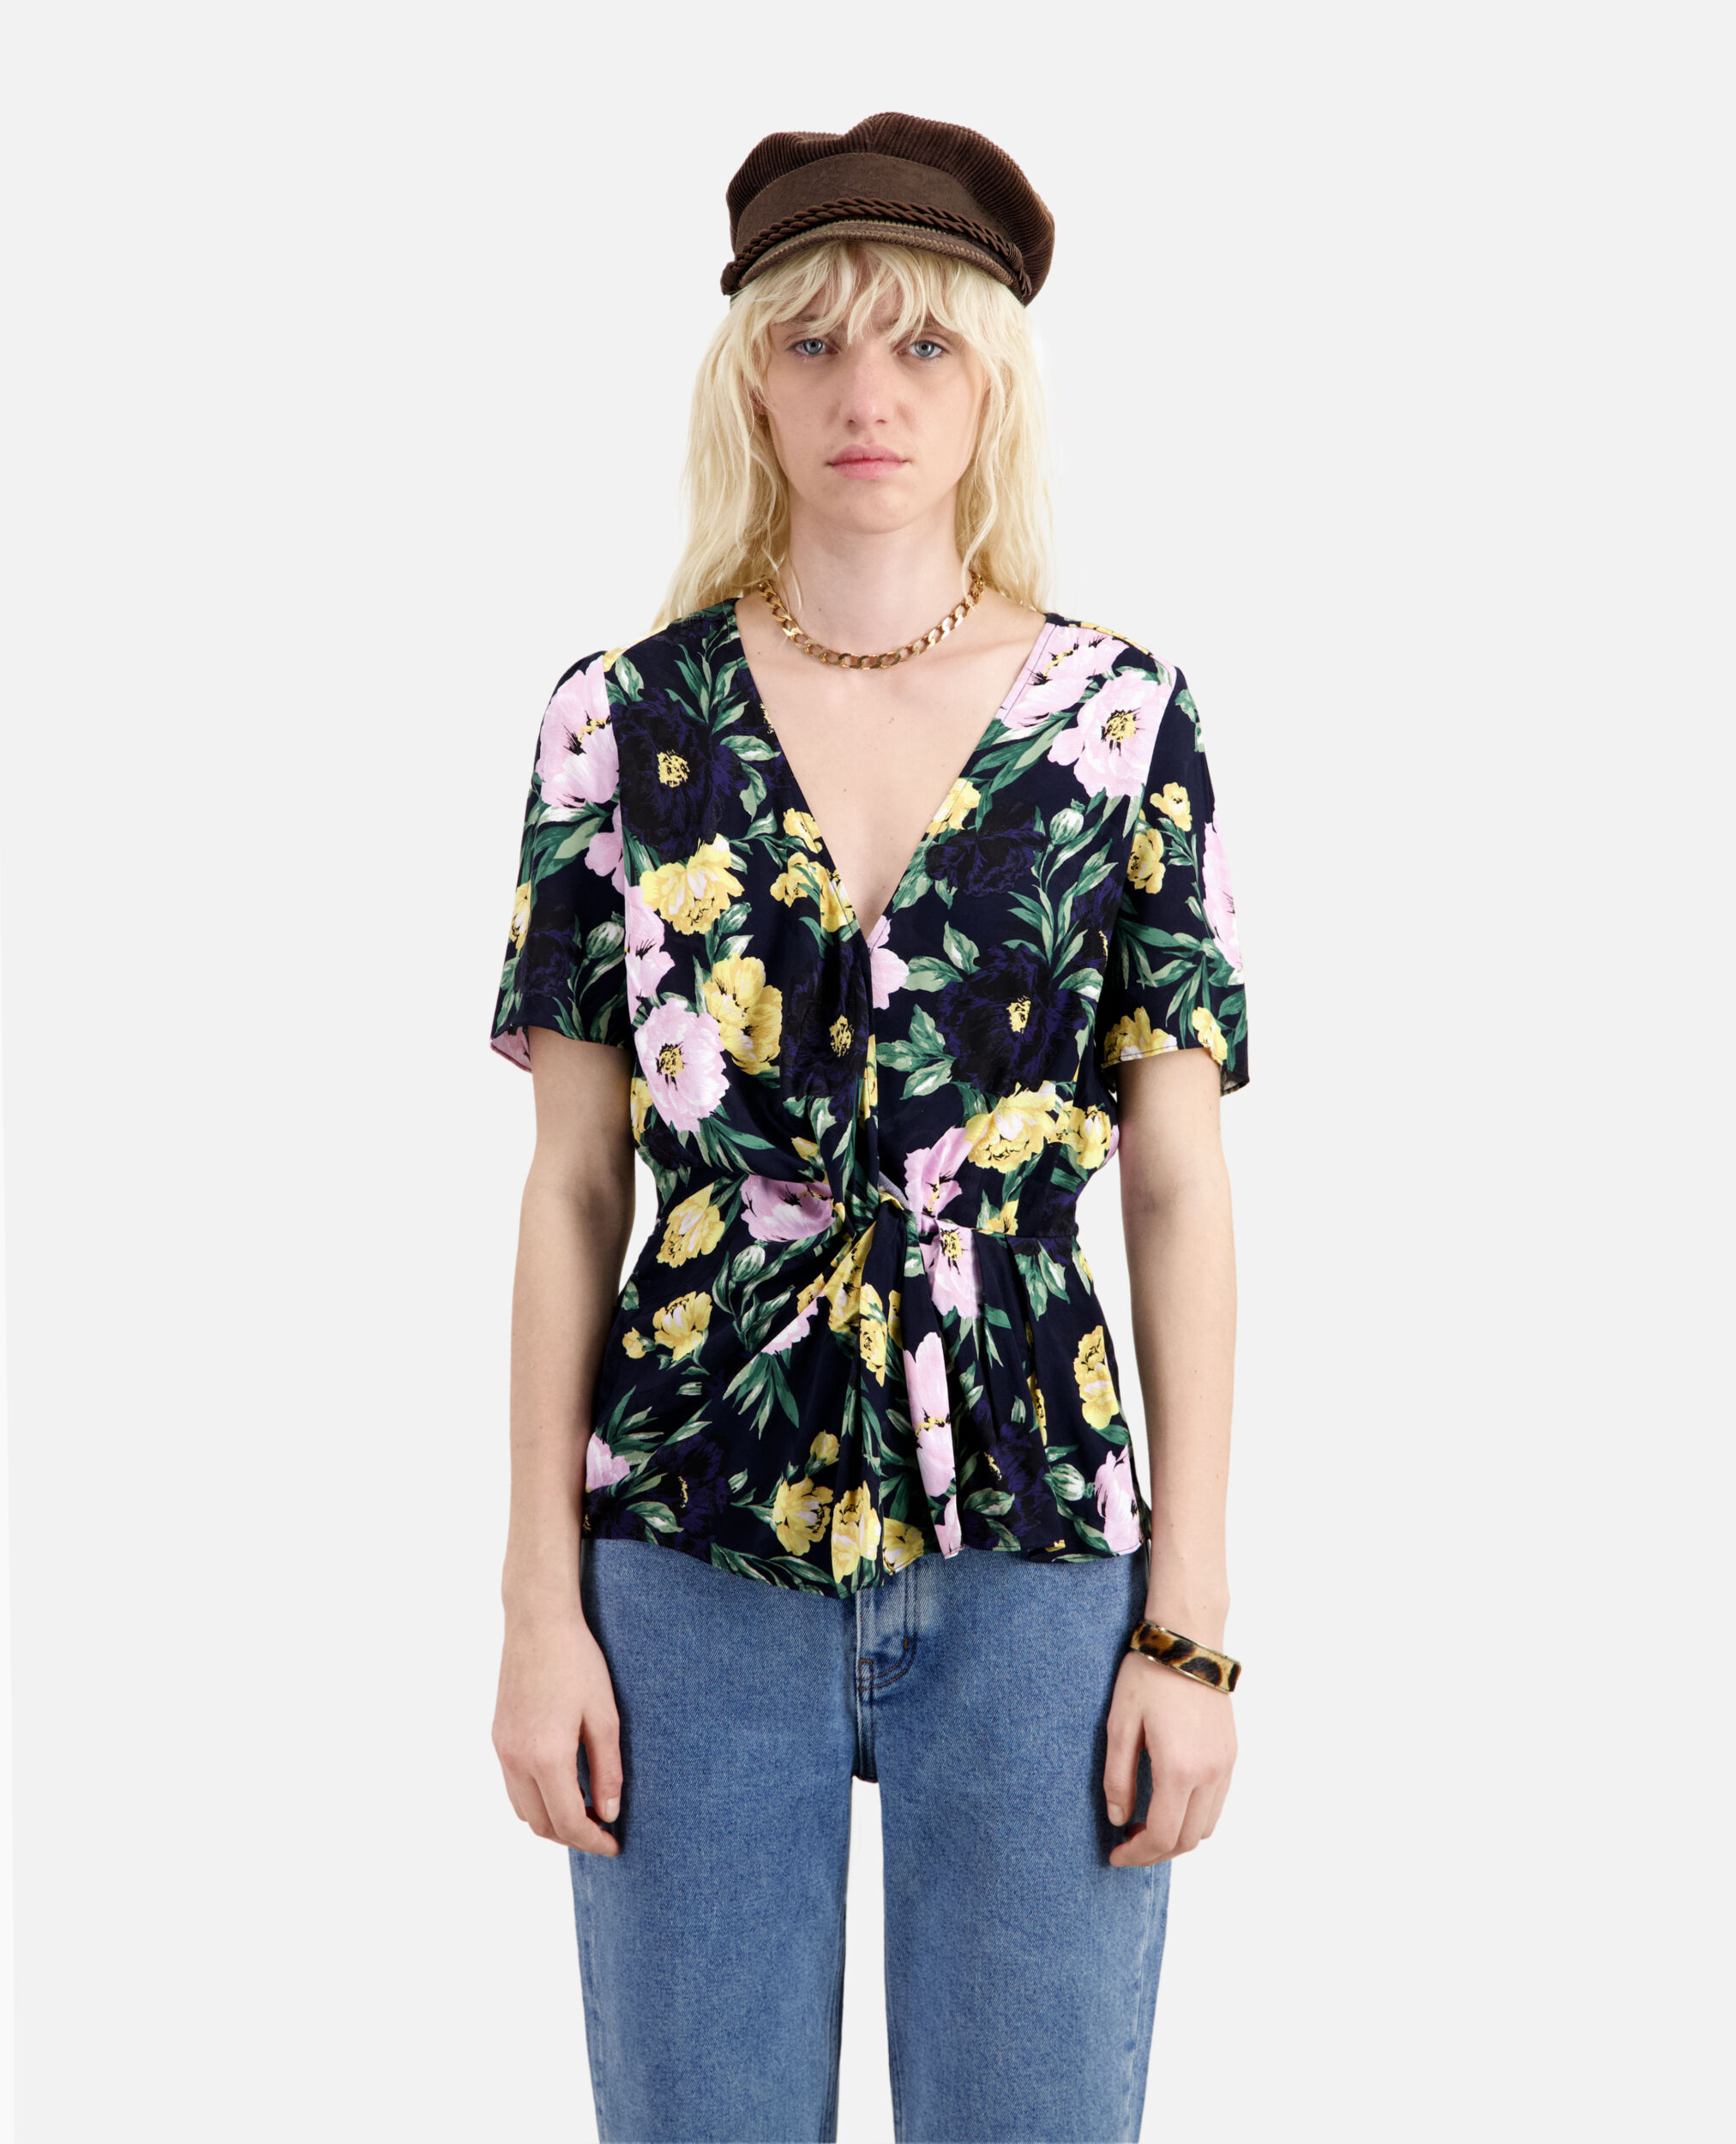 Printed top with draping, LIGHT PINK / DARK NAVY, hi-res image number null